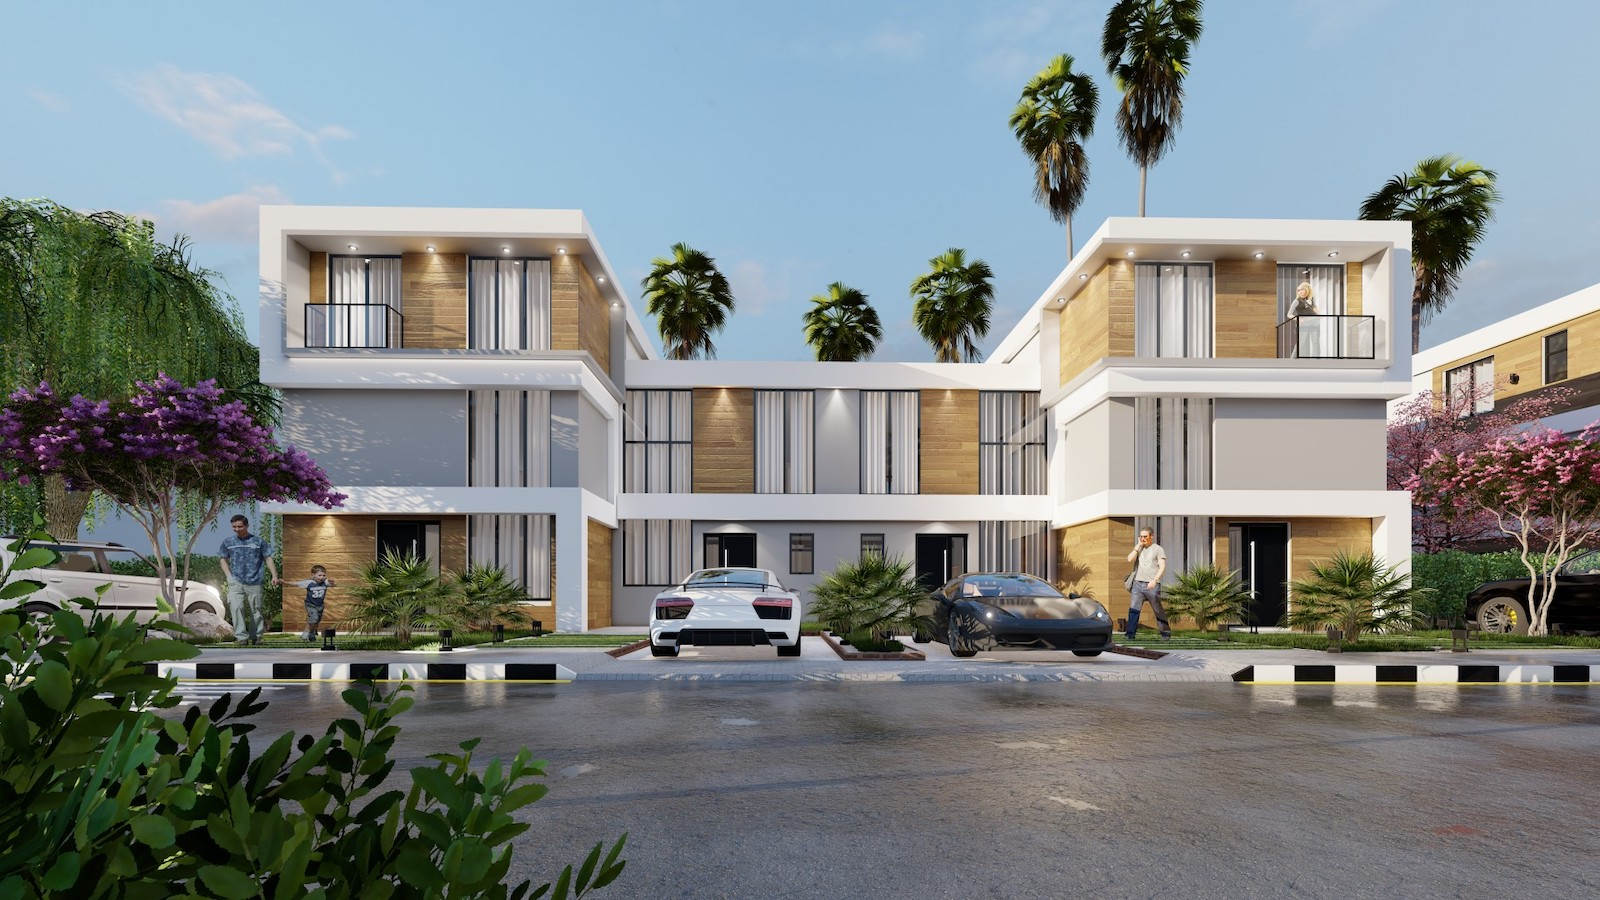 3 Bedroom Villas with Walking Distance to The Beach from £305,500